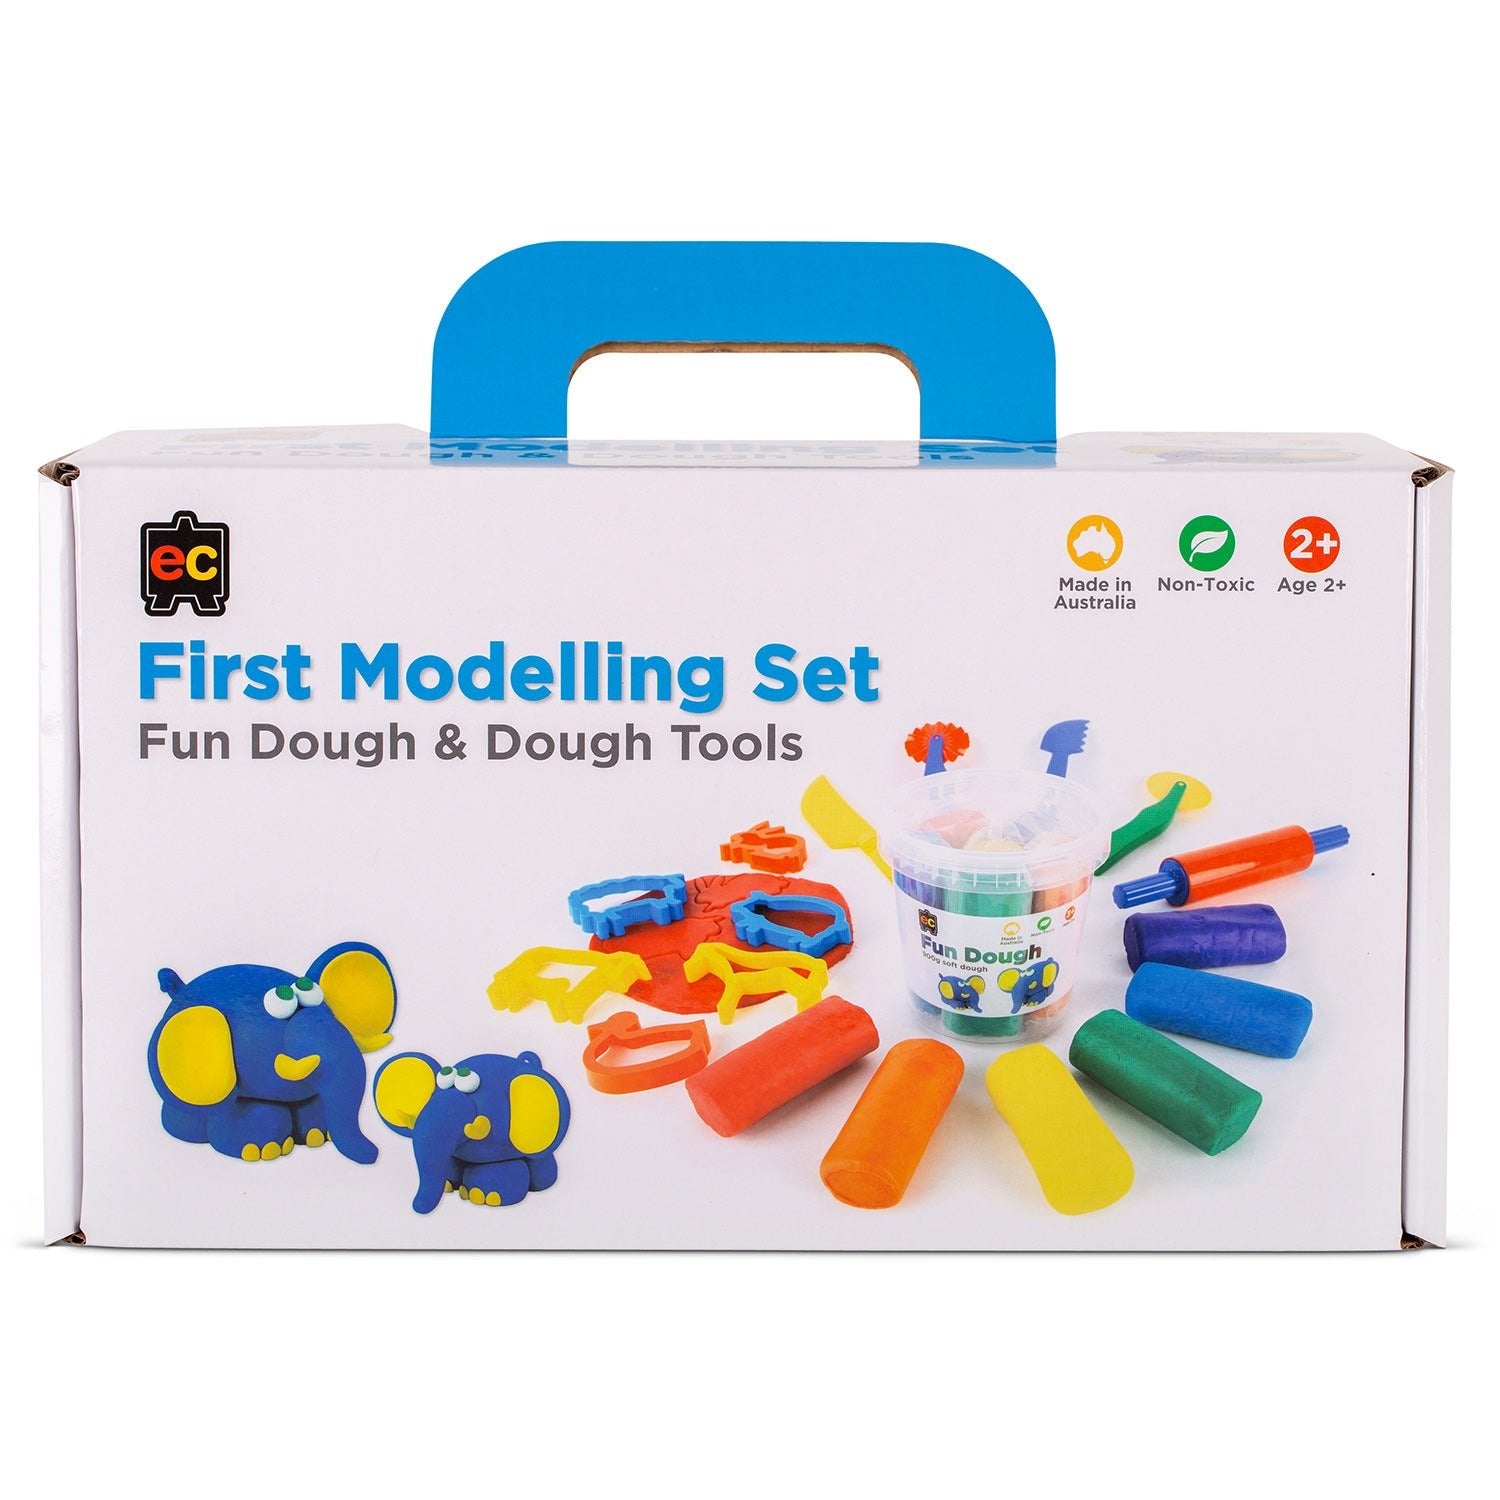 FIRST MODELLING SET by EDUCATIONAL COLOURS - The Playful Collective